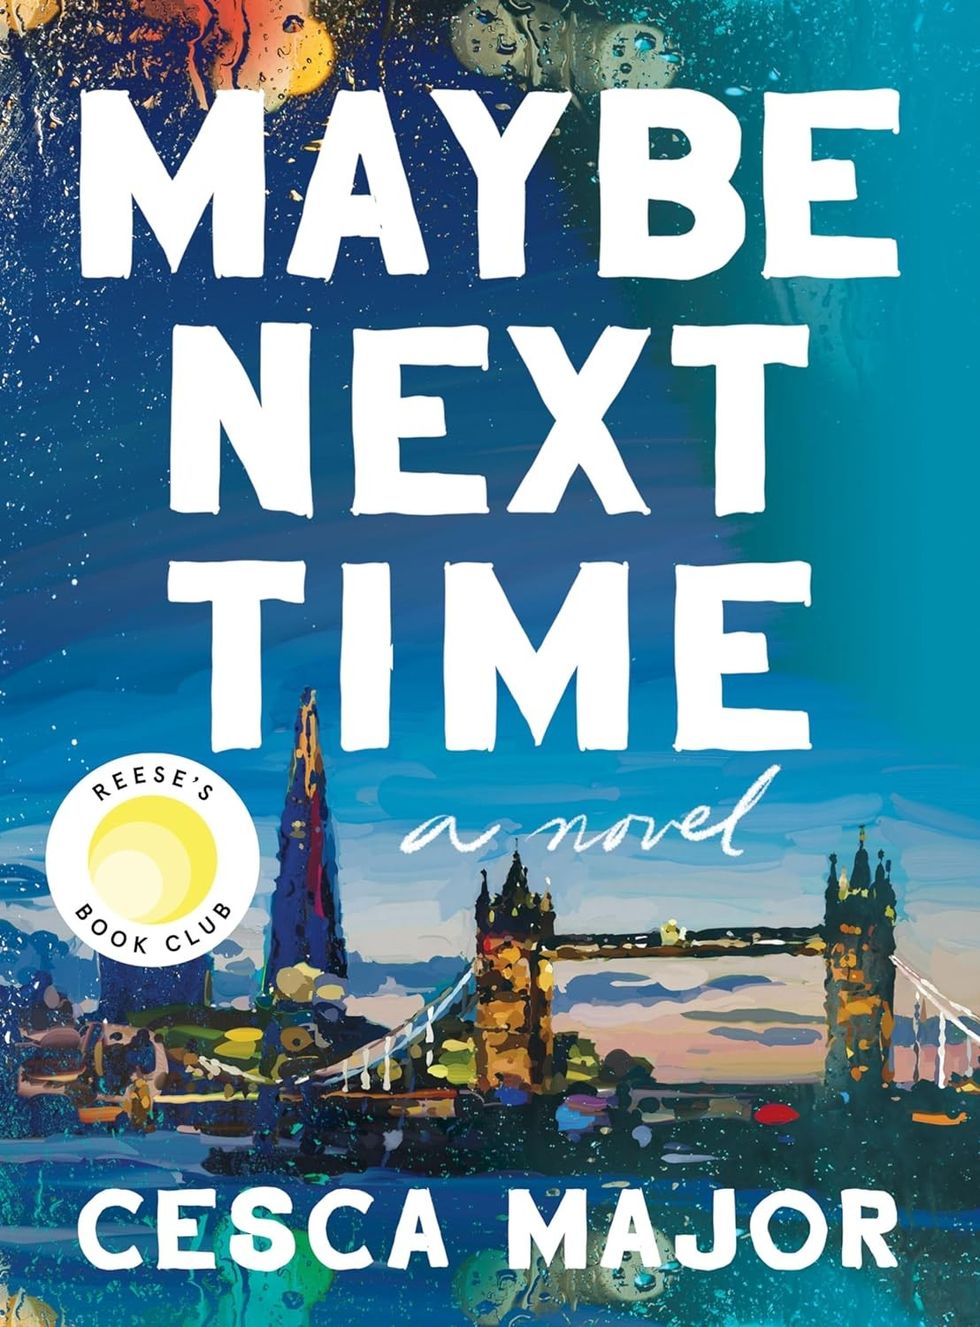 "Maybe Next Time" by Cesca Major